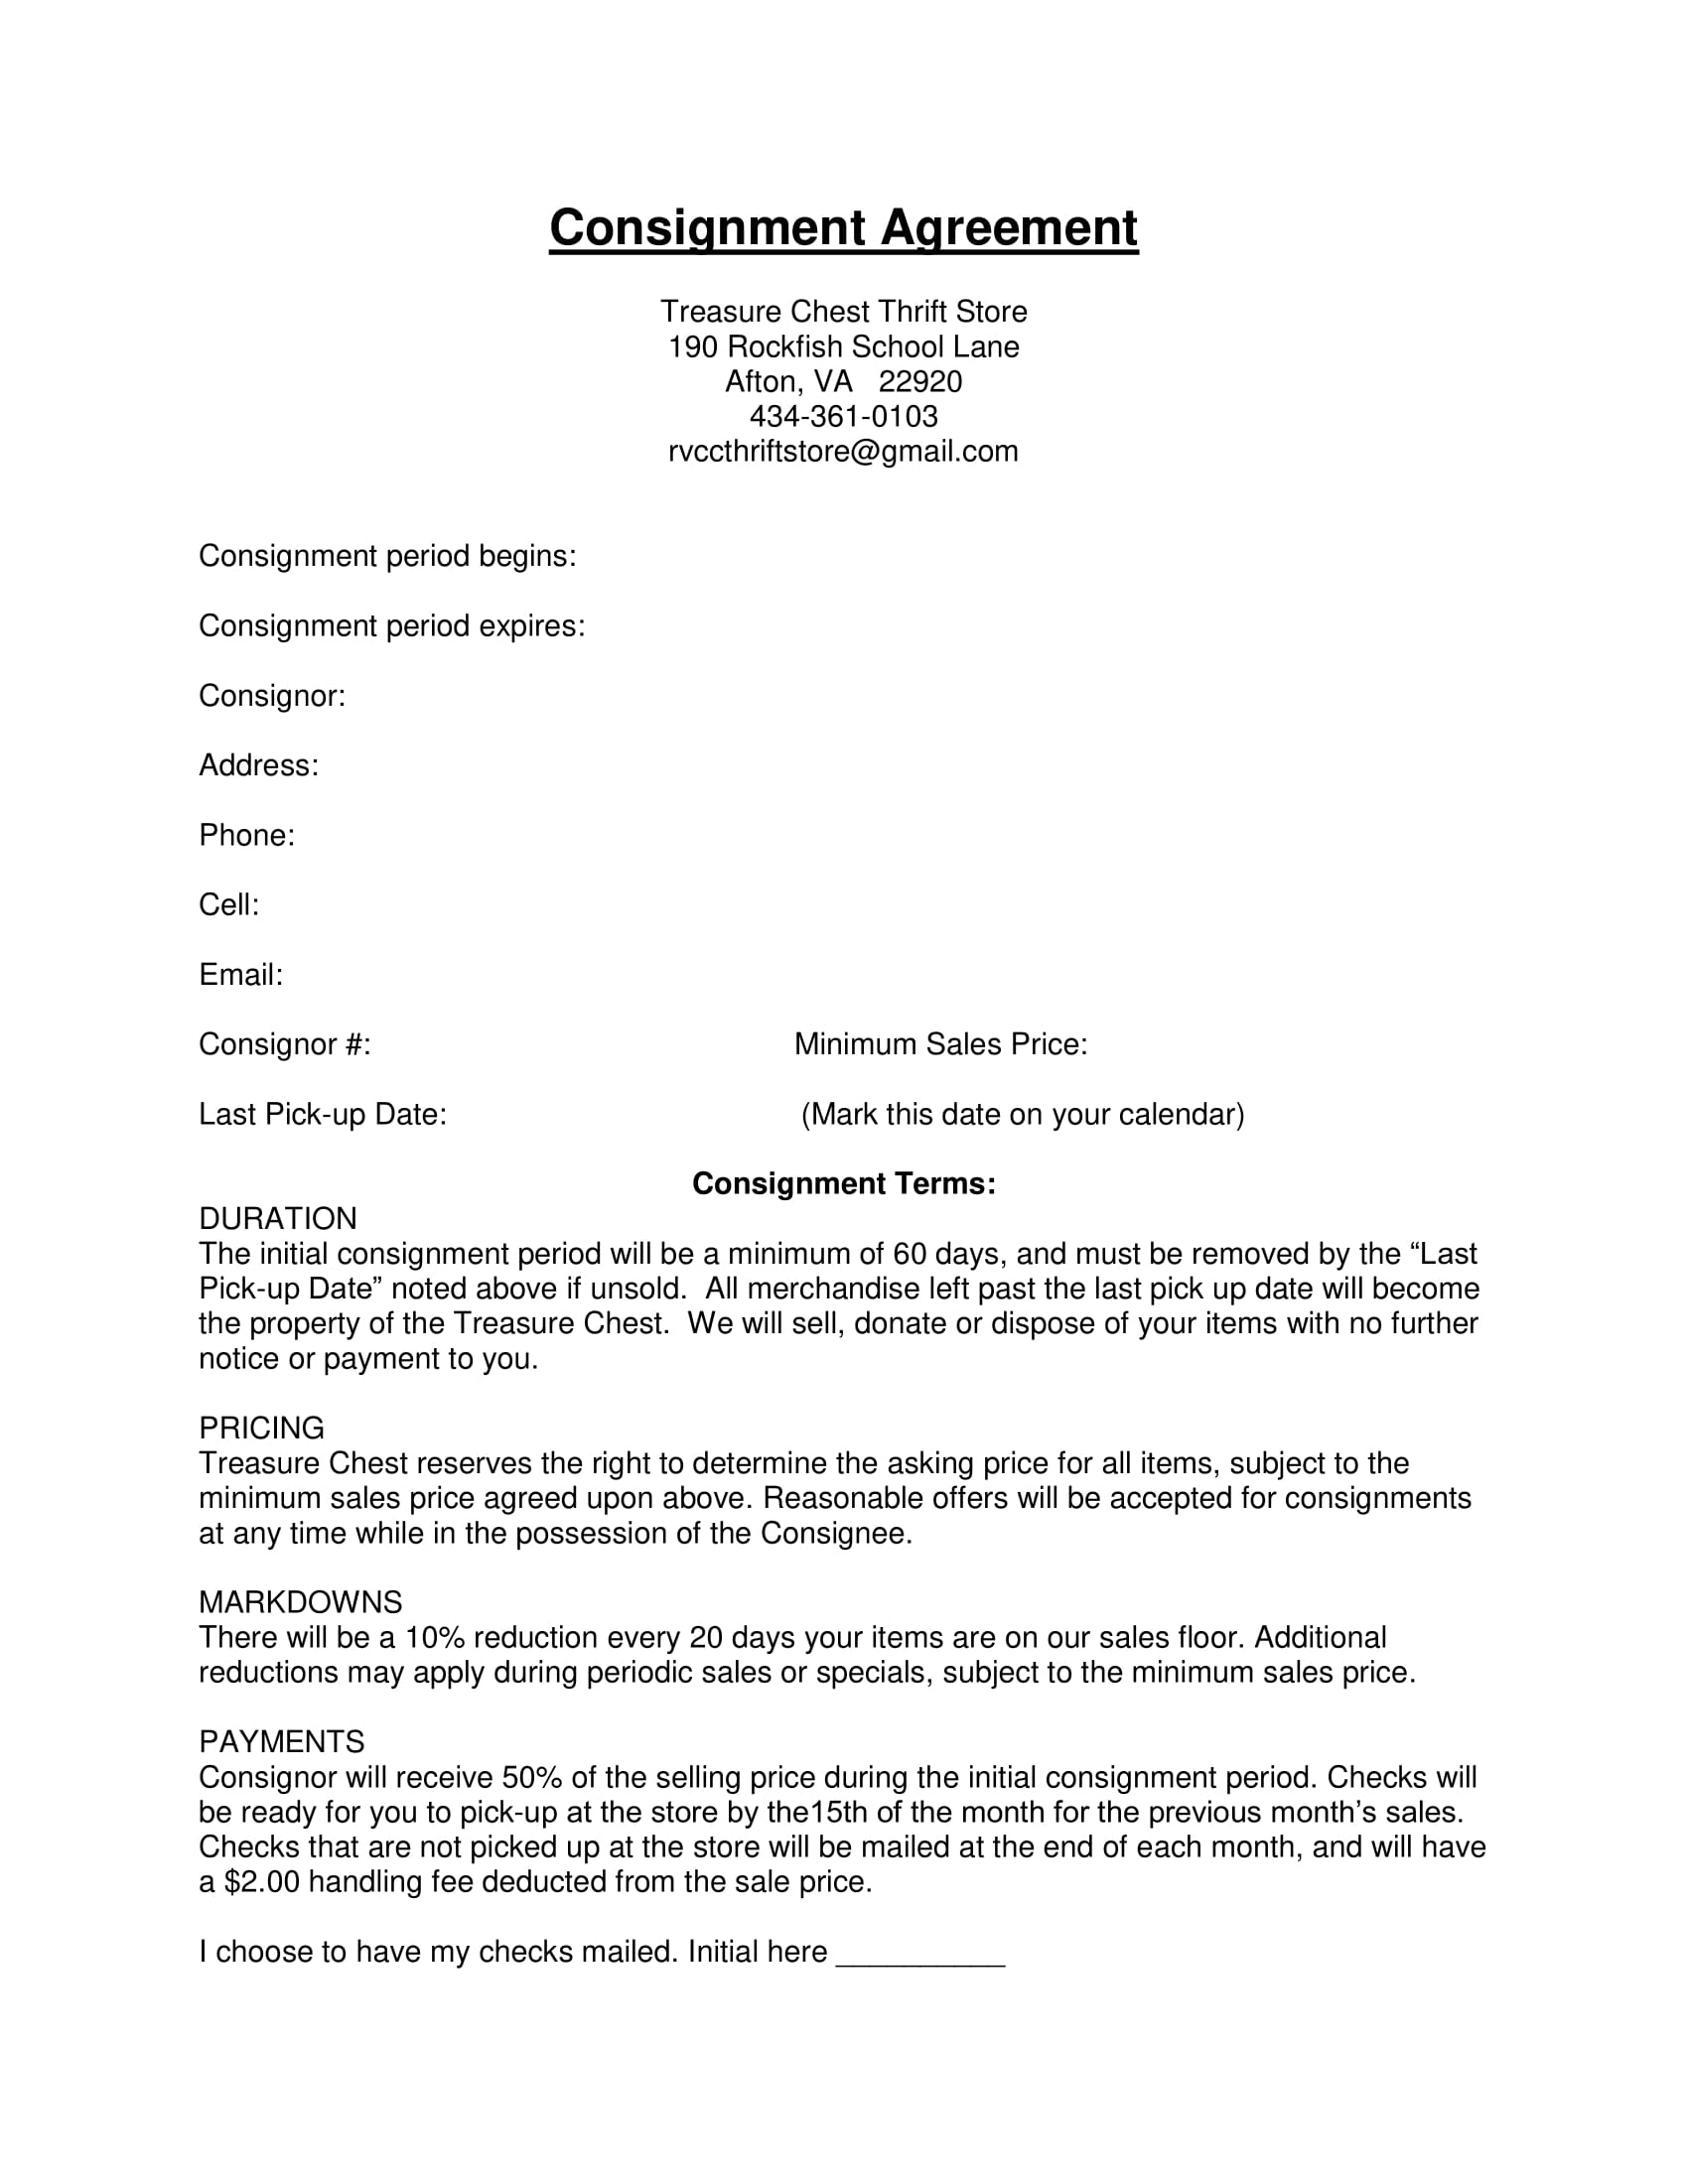 Gallery Consignment Agreement 16 Consignment Agreement Examples Pdf Doc Examples